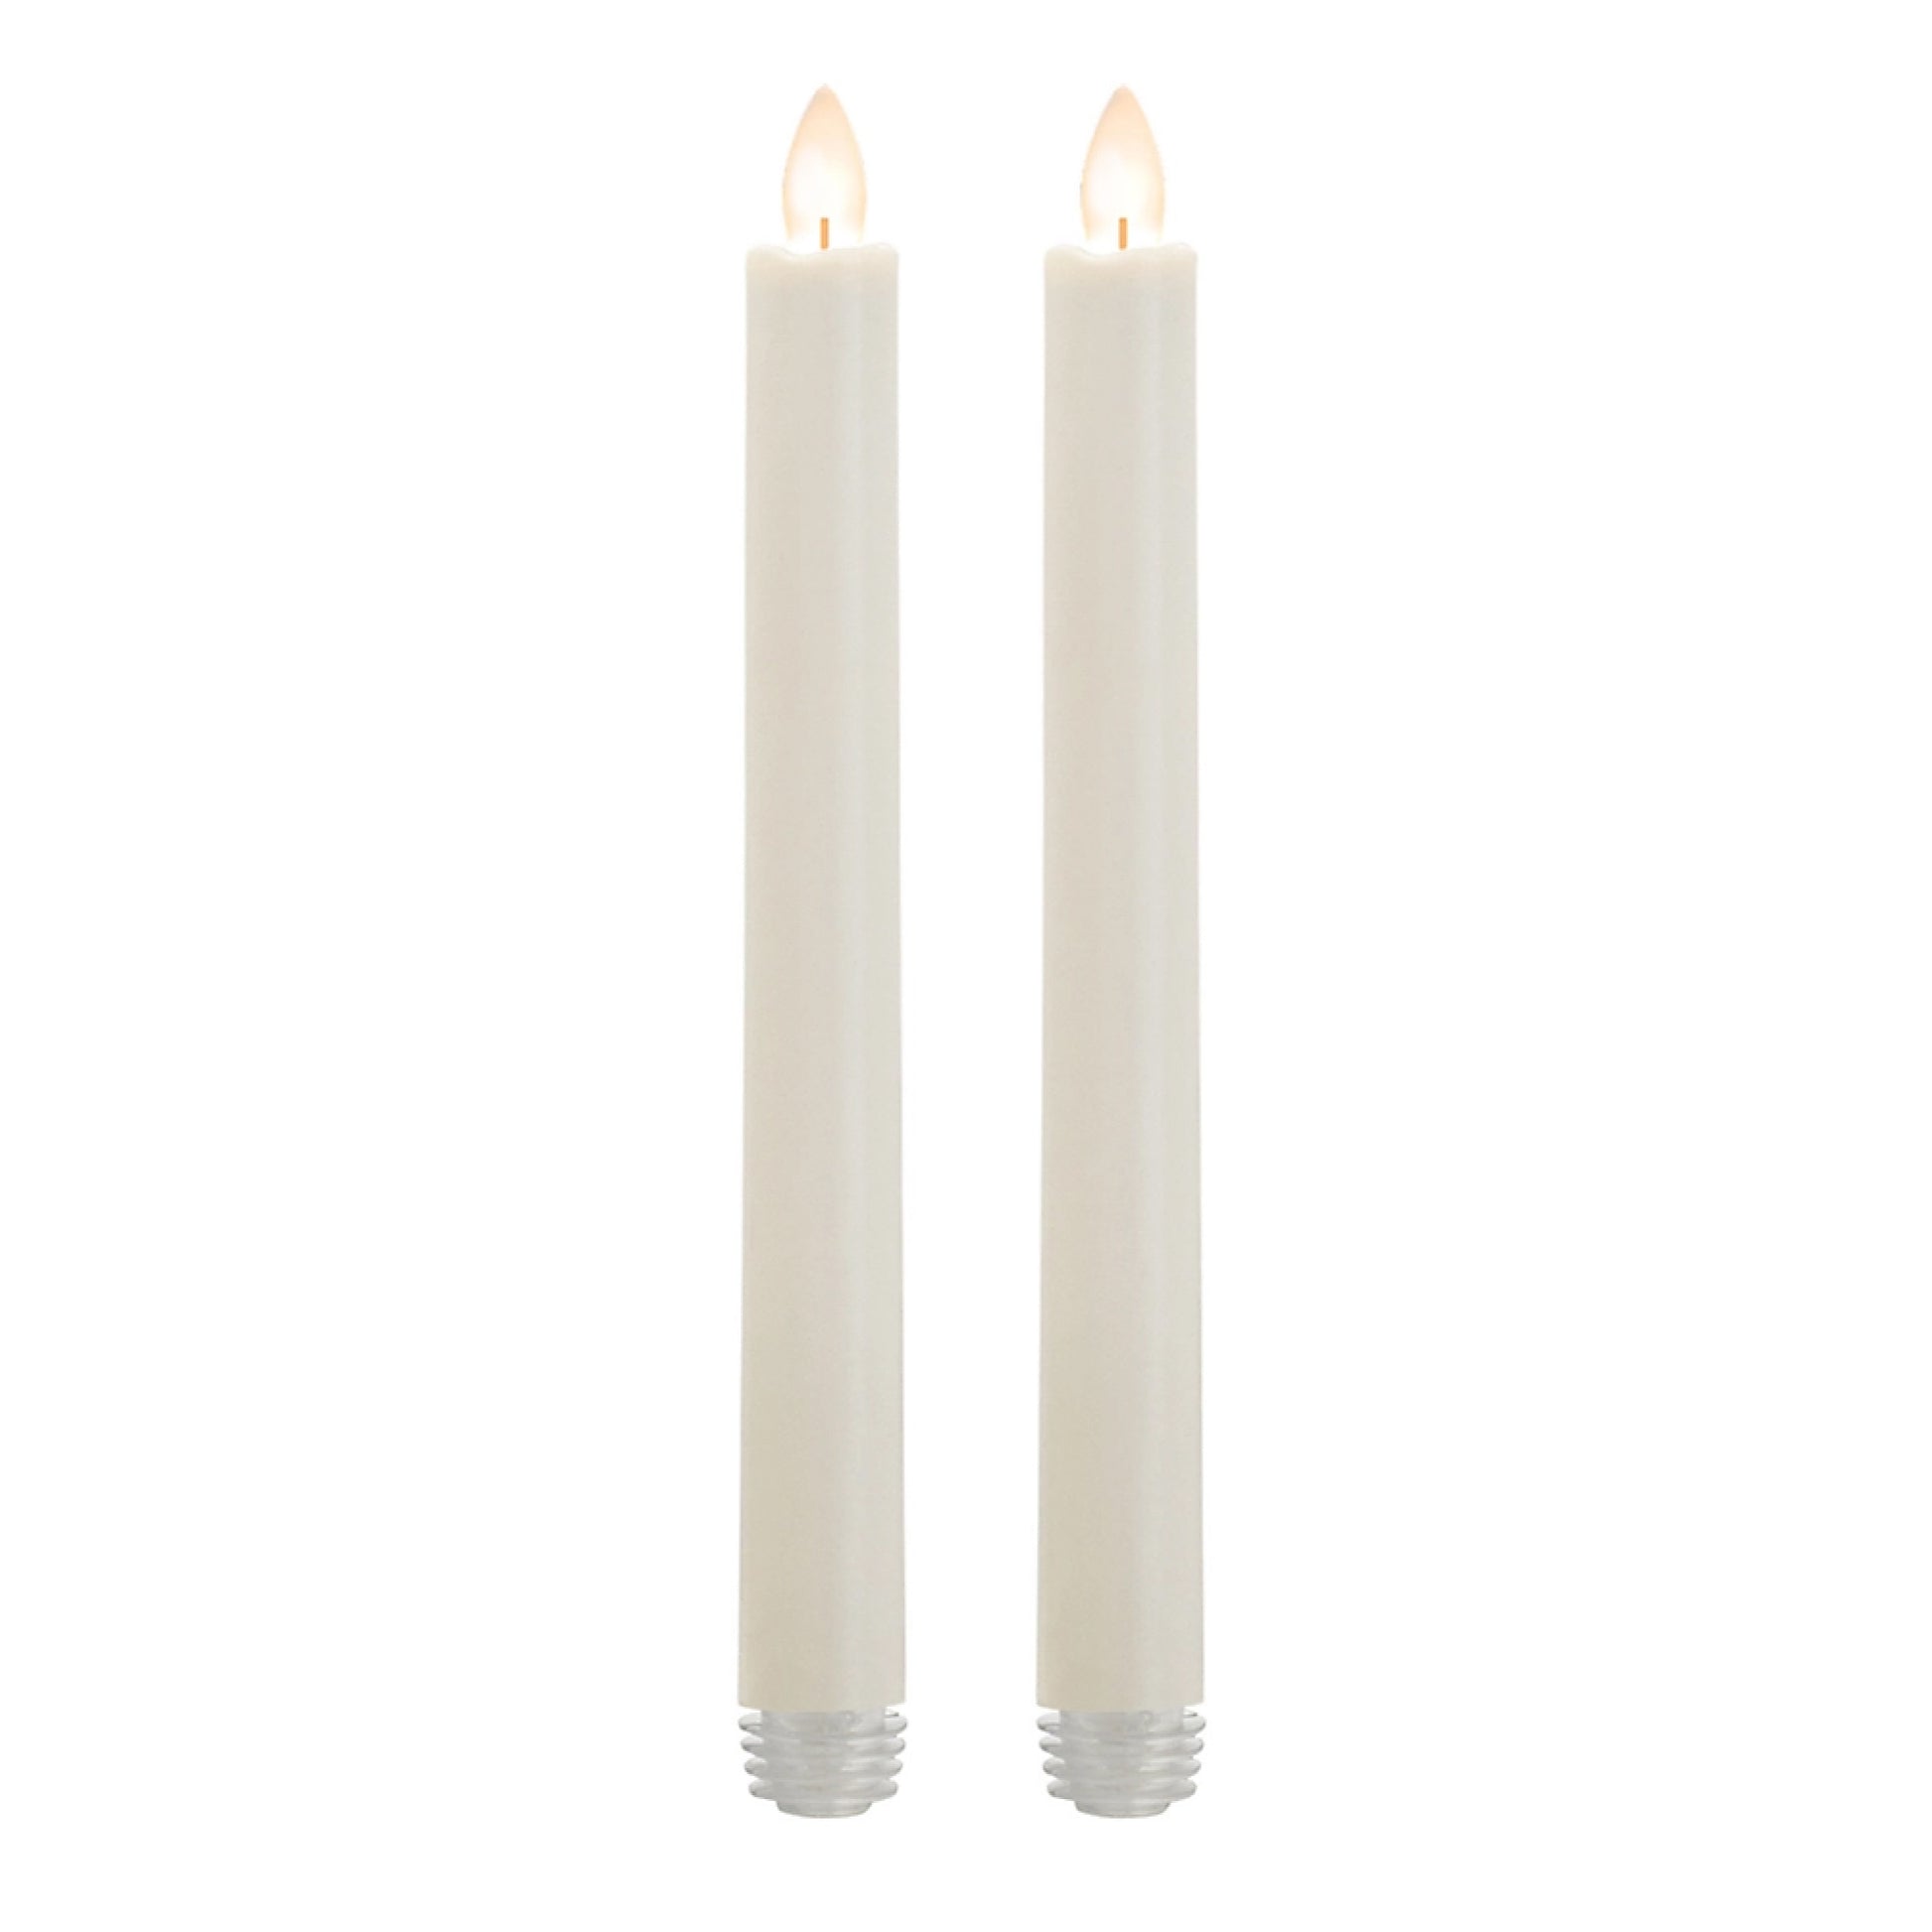 Sullivan's LED Battery Operated Wax Taper Candles - Set of 2